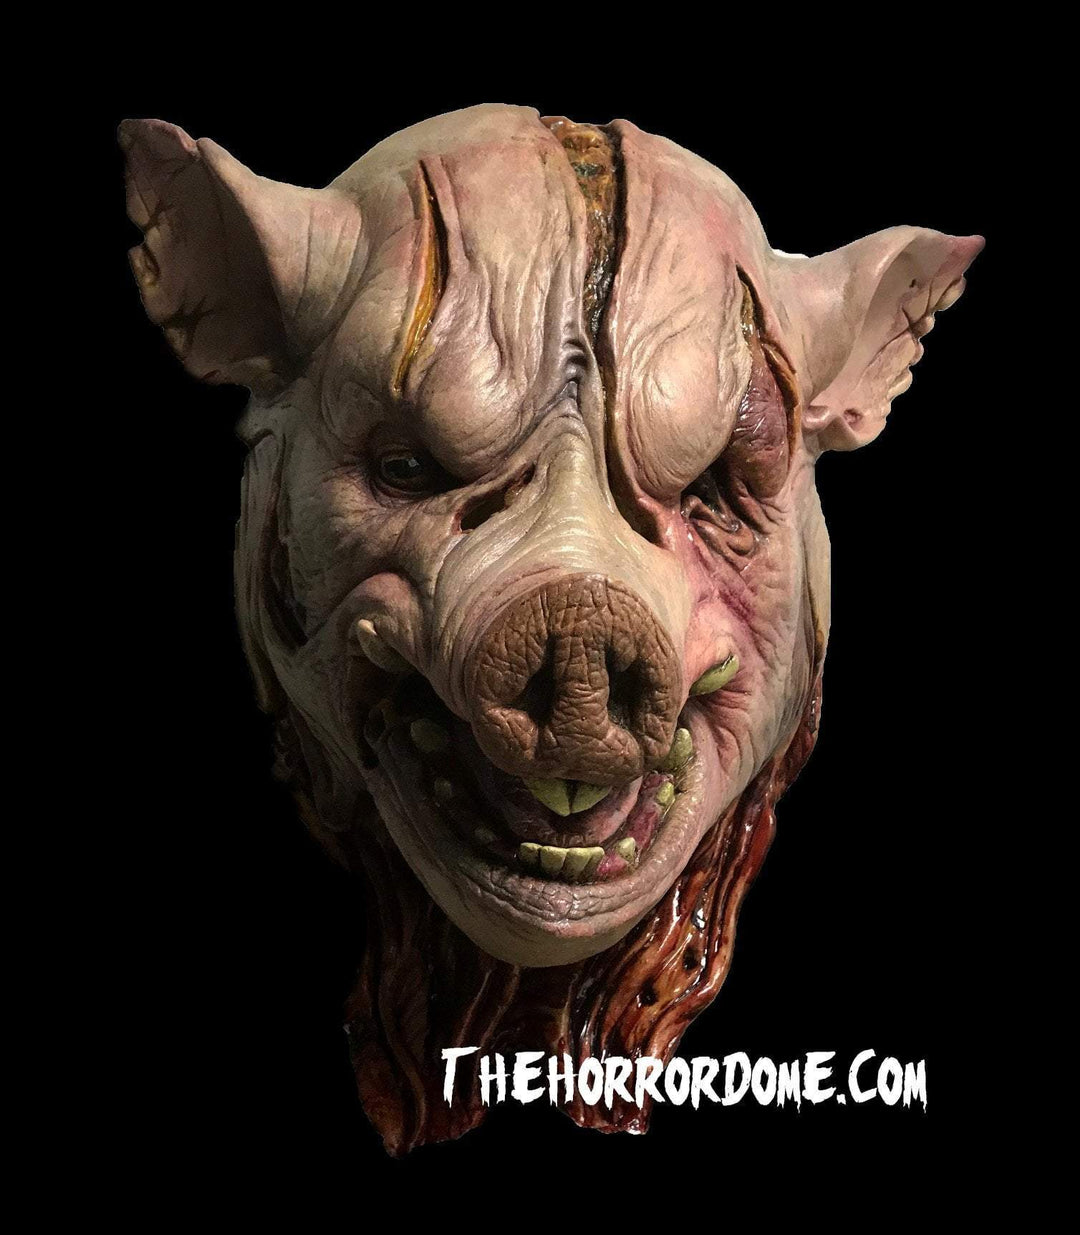 Pig Head Halloween mask by The Horror Dome. Hand-painted, life-size silicone pig disguise provides seamless look over clothing. Realistic swine details like furrowed brow and flared nostrils. Perfect mask for completing twisted farmhouse or butcher shop costume themes.